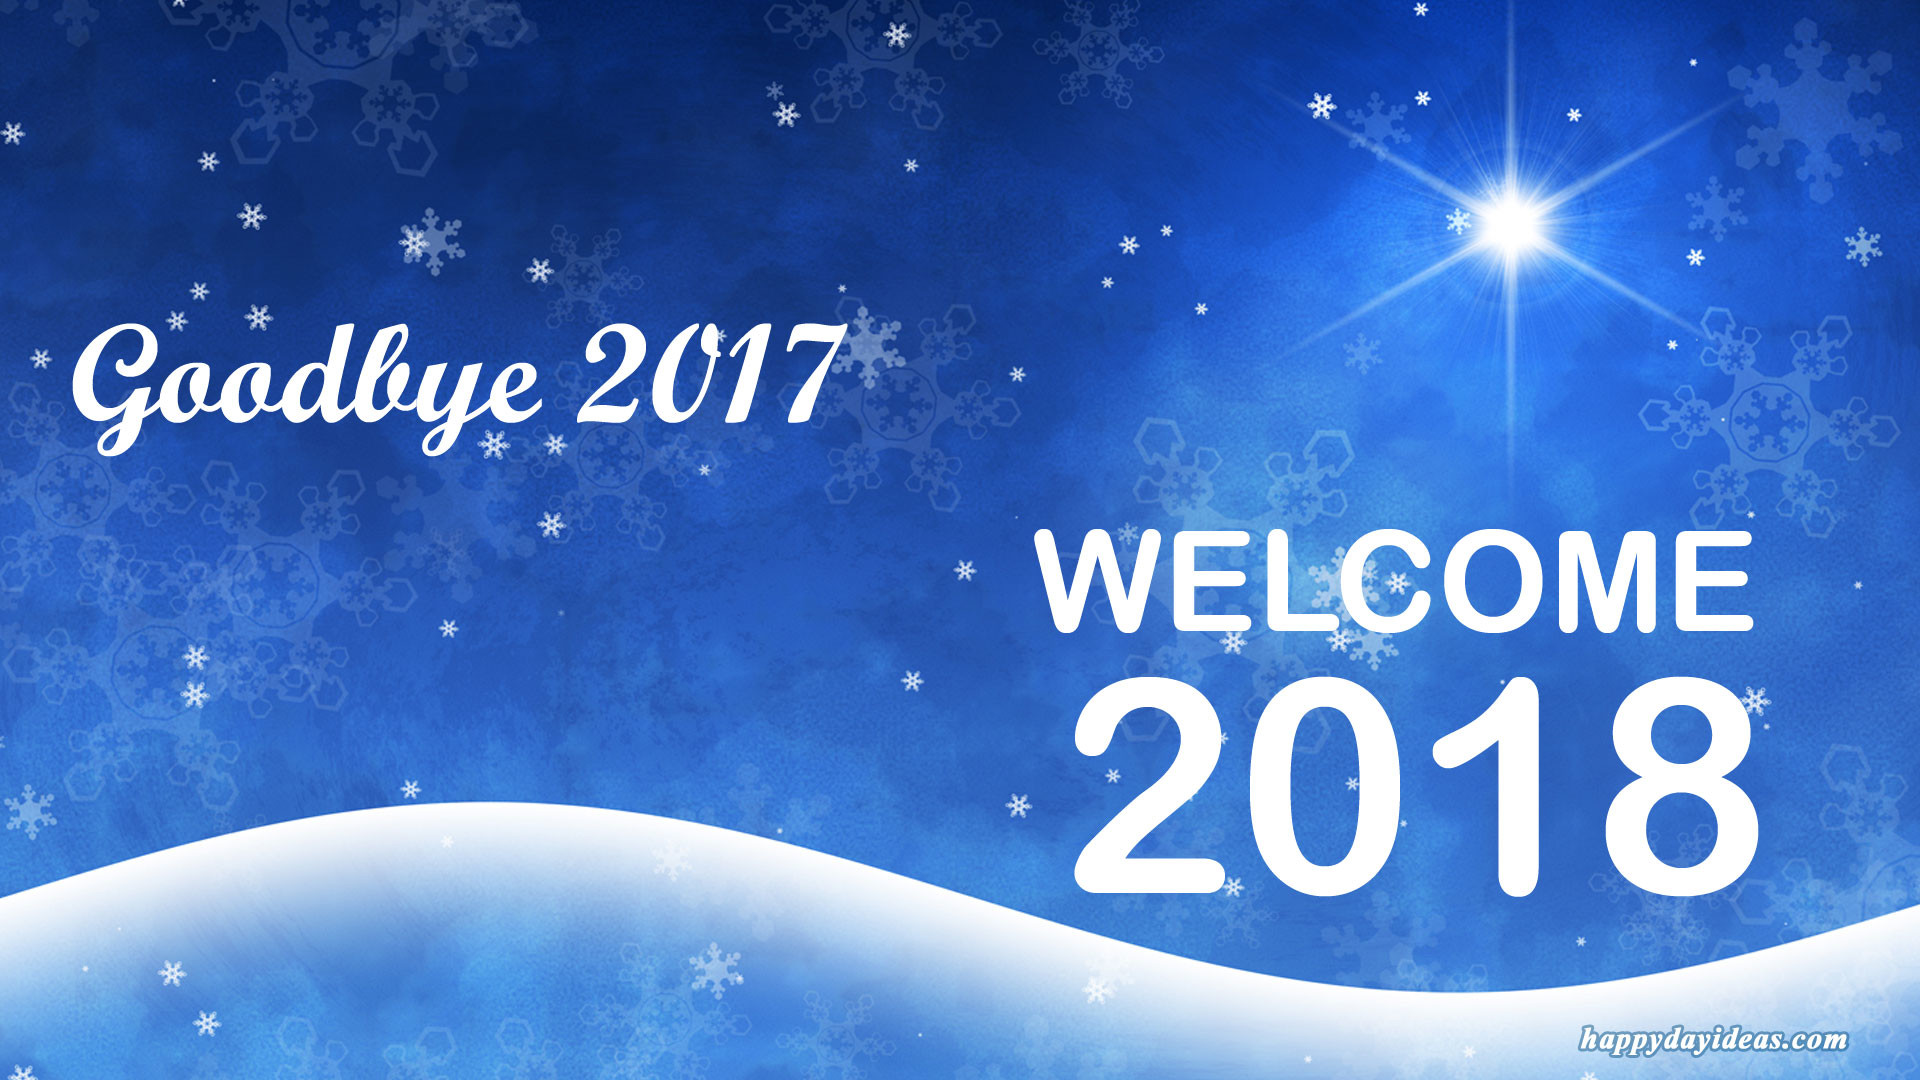 Goodbye 2016 Welcome 2017 Wallpaper Images Source Â - Good Bye 2017 Welcome 2018 , HD Wallpaper & Backgrounds